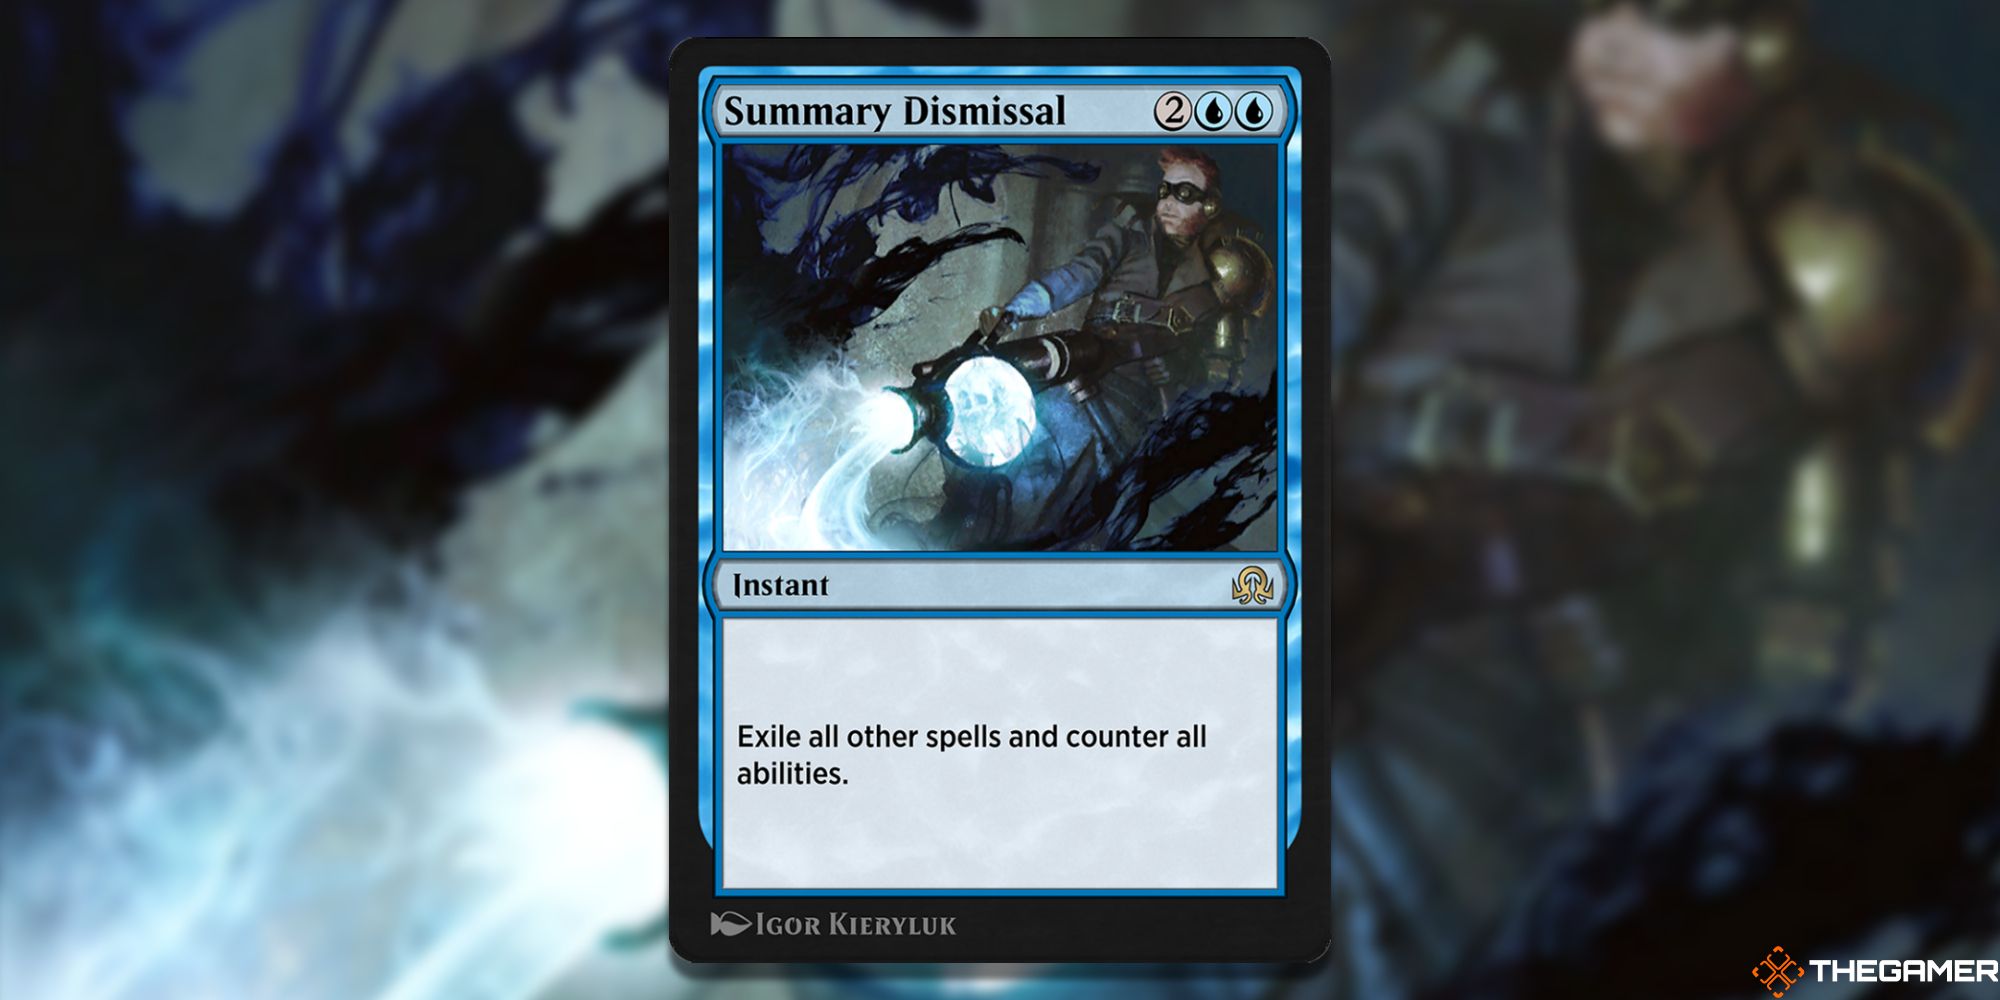 Image of the Summary Dismissal card in Magic: The Gathering, with art by Igor Kieryluk